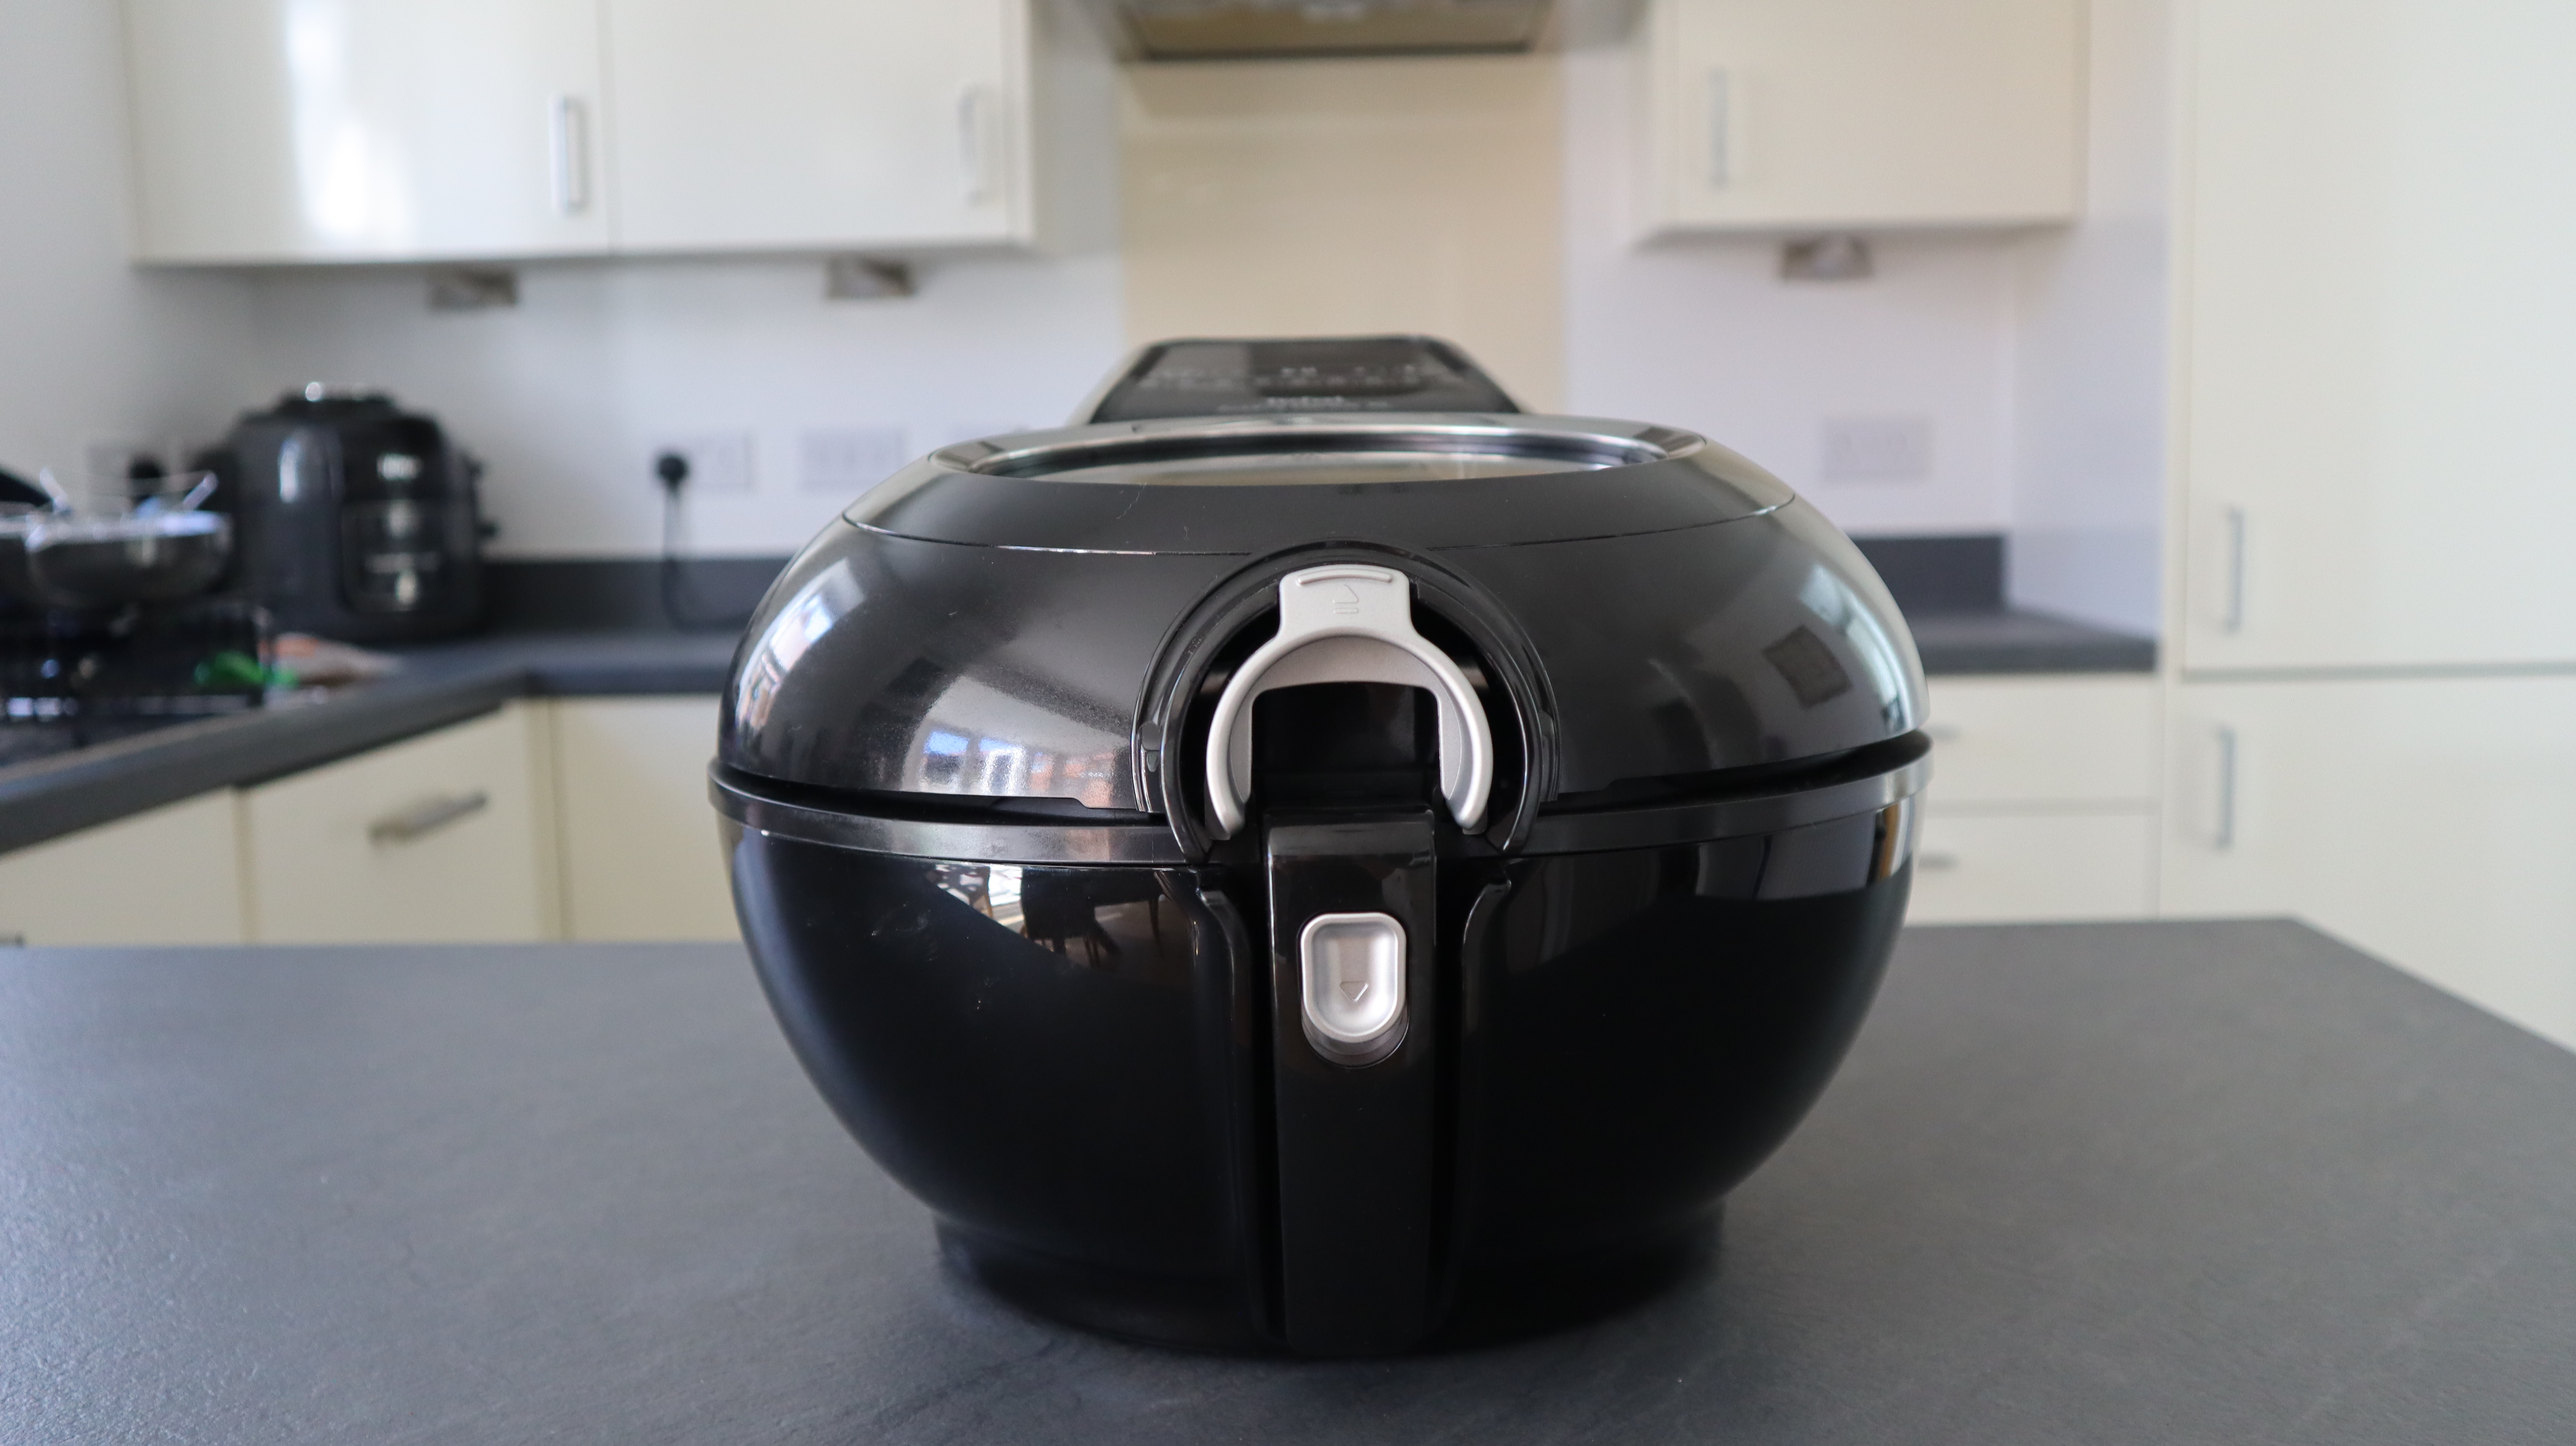 Tefal Actifry Genius XL 2in1 review: brilliant and massive air fryer that's  also a pressure cooker